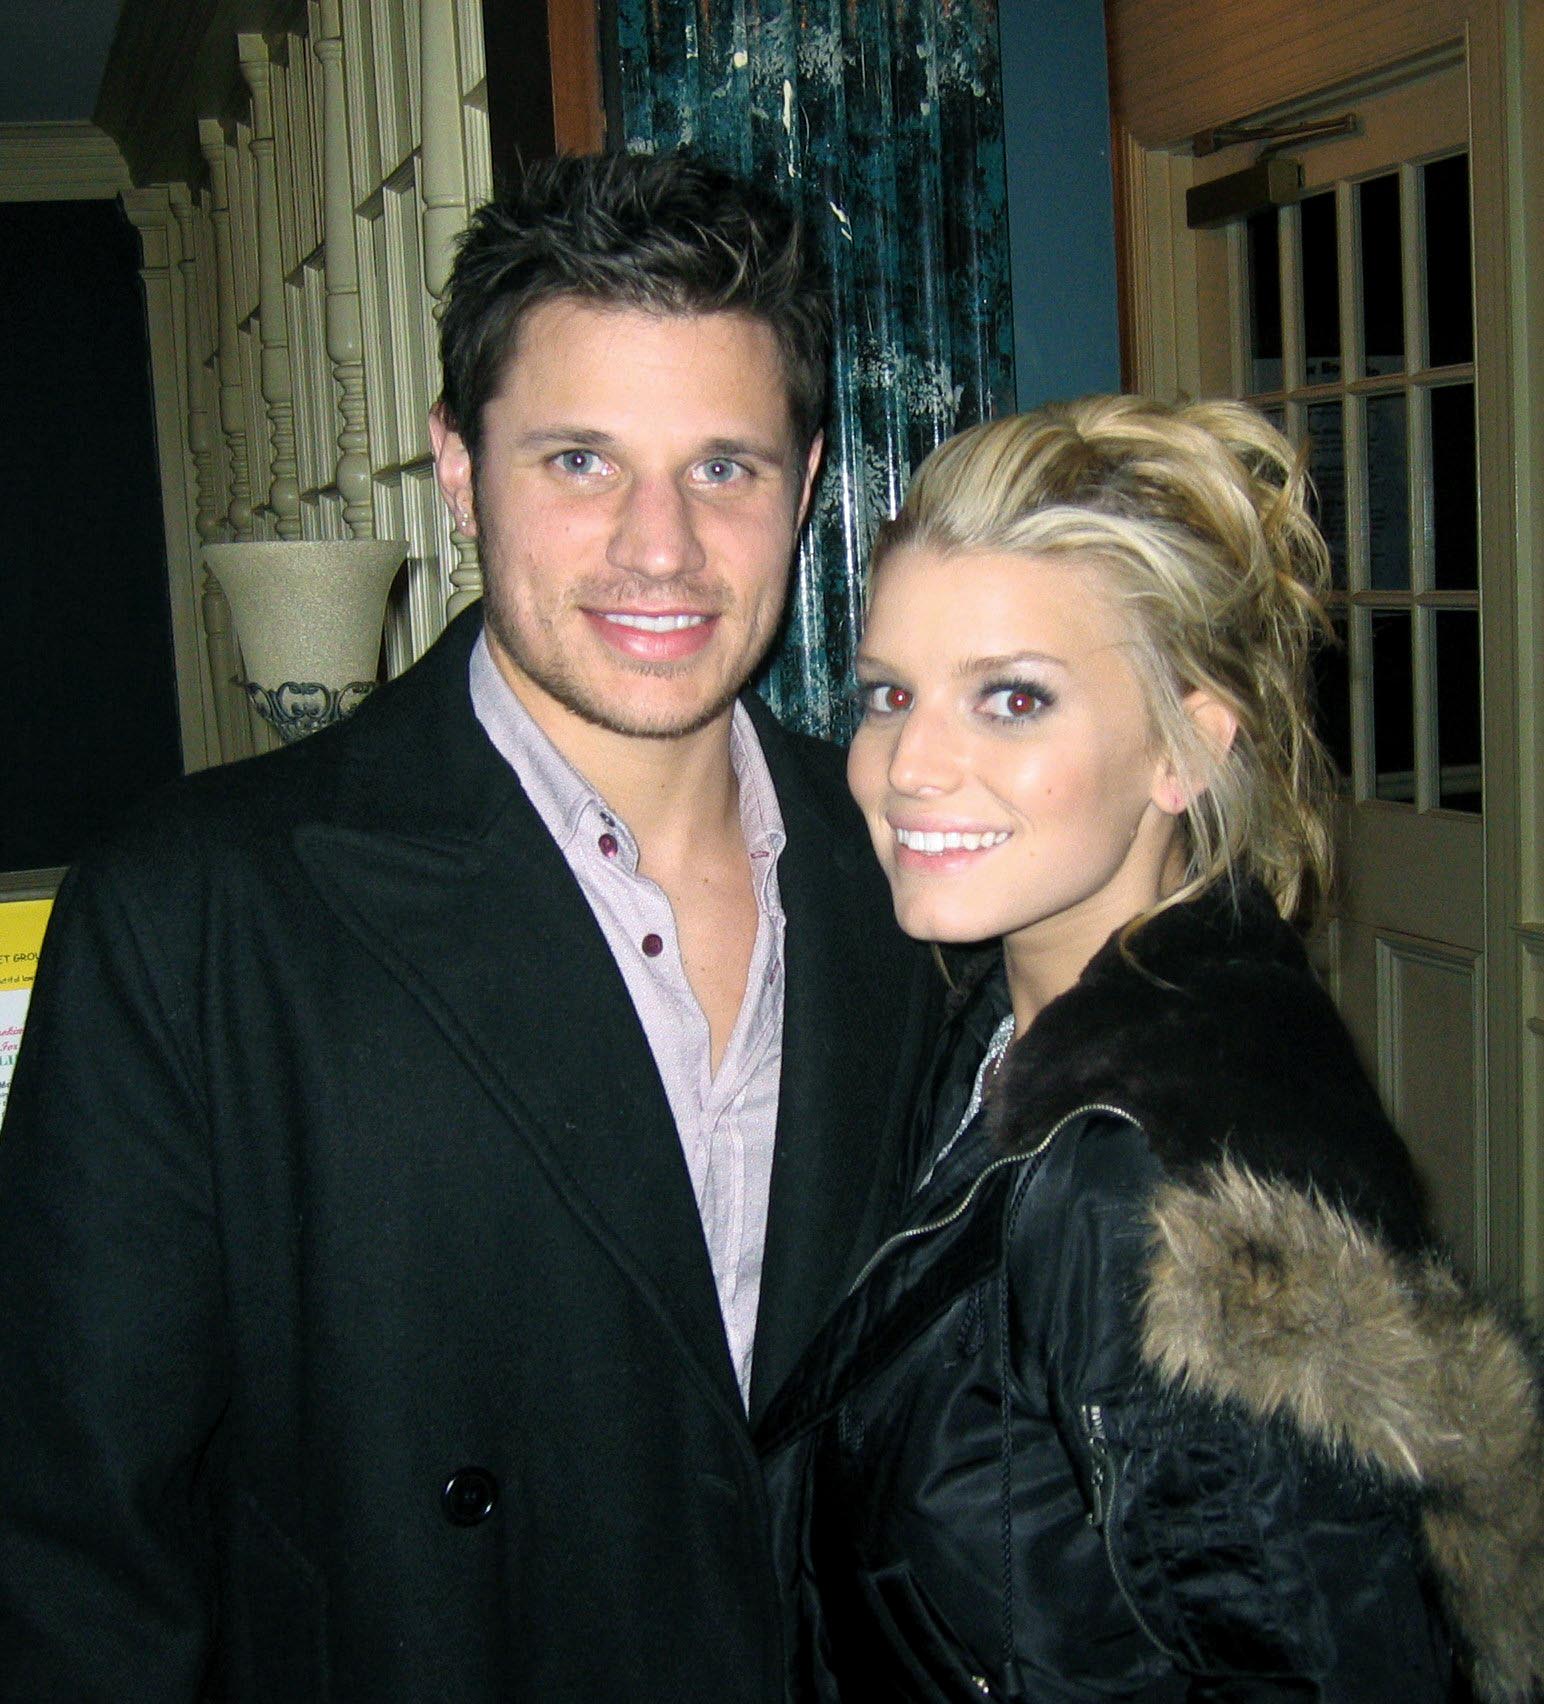 Nick Lachey News, Pictures, and Videos - E! Online